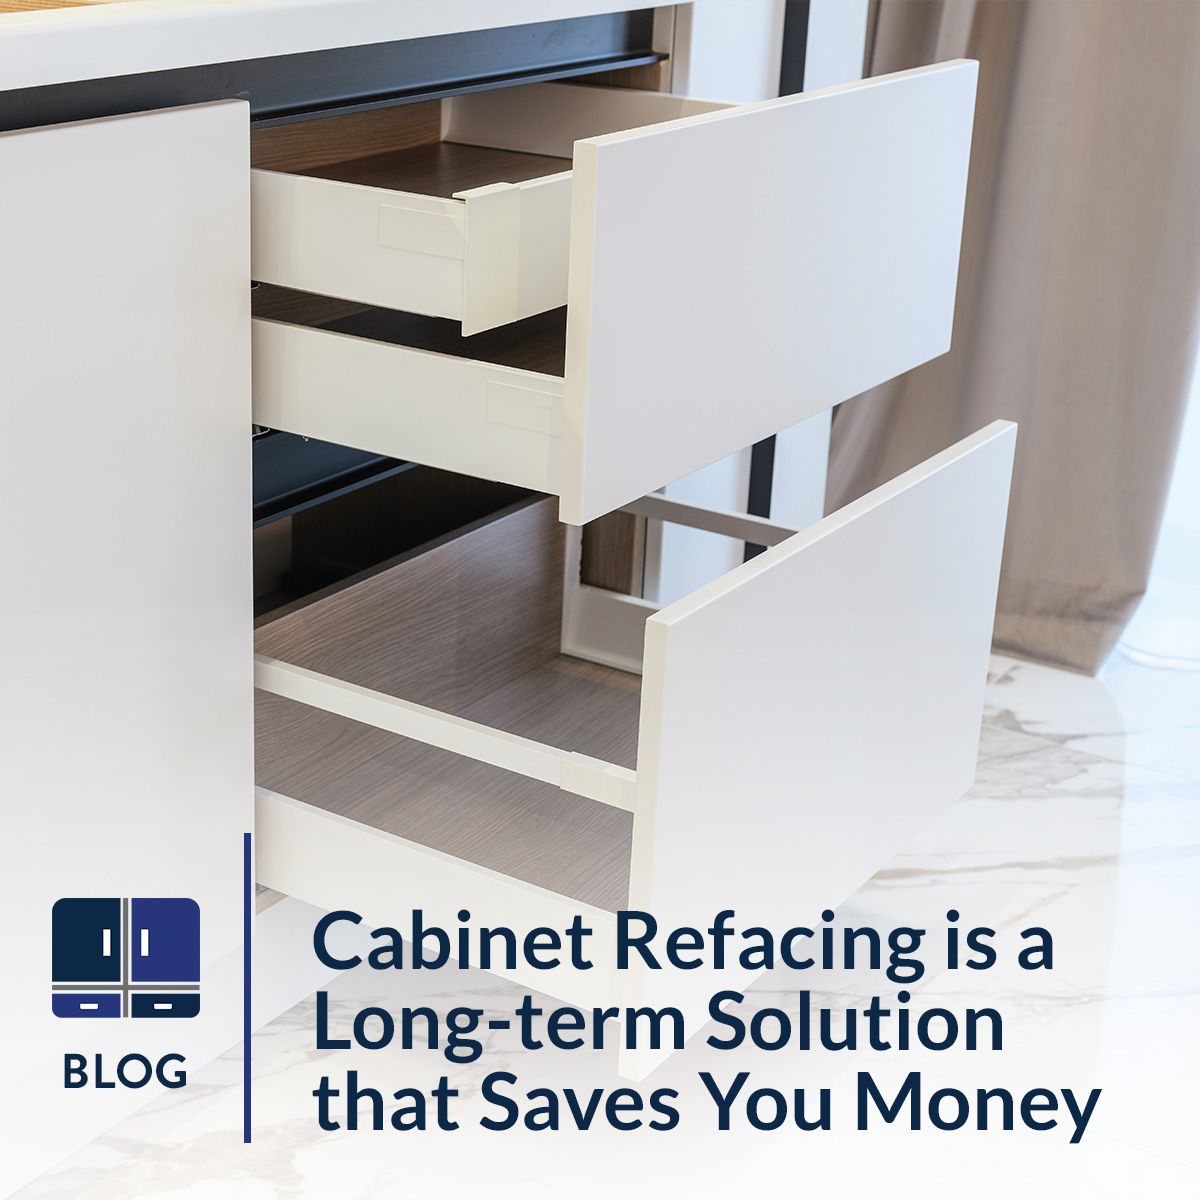 Cabiner Refacing is a long-term solution that saves you money